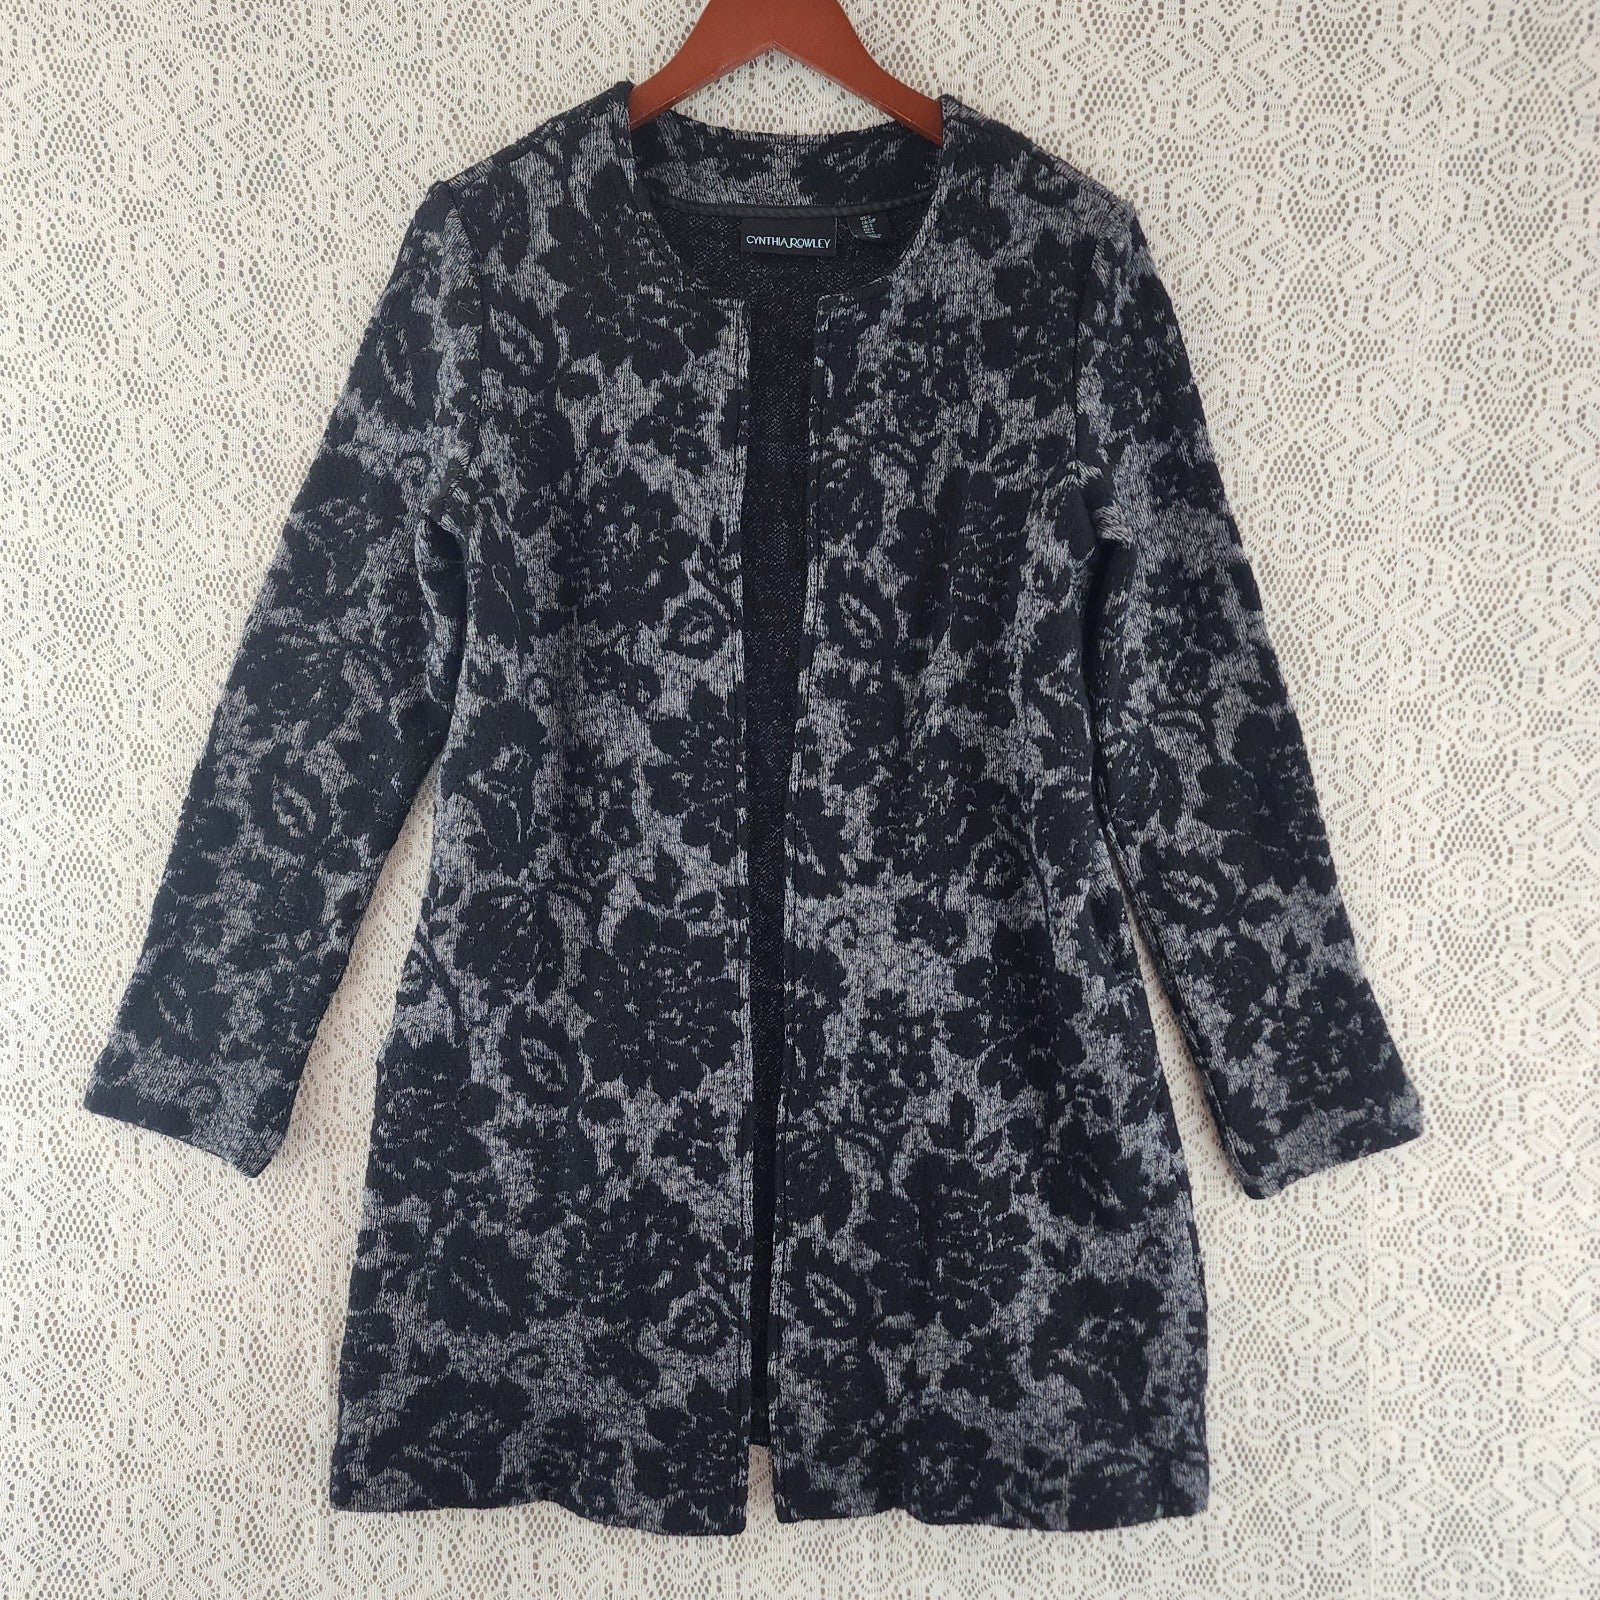 Classic Cynthia Rowley Wool Blend Floral Textured Open Front Long Sweater Cardigan S IyH9FNsgY for sale